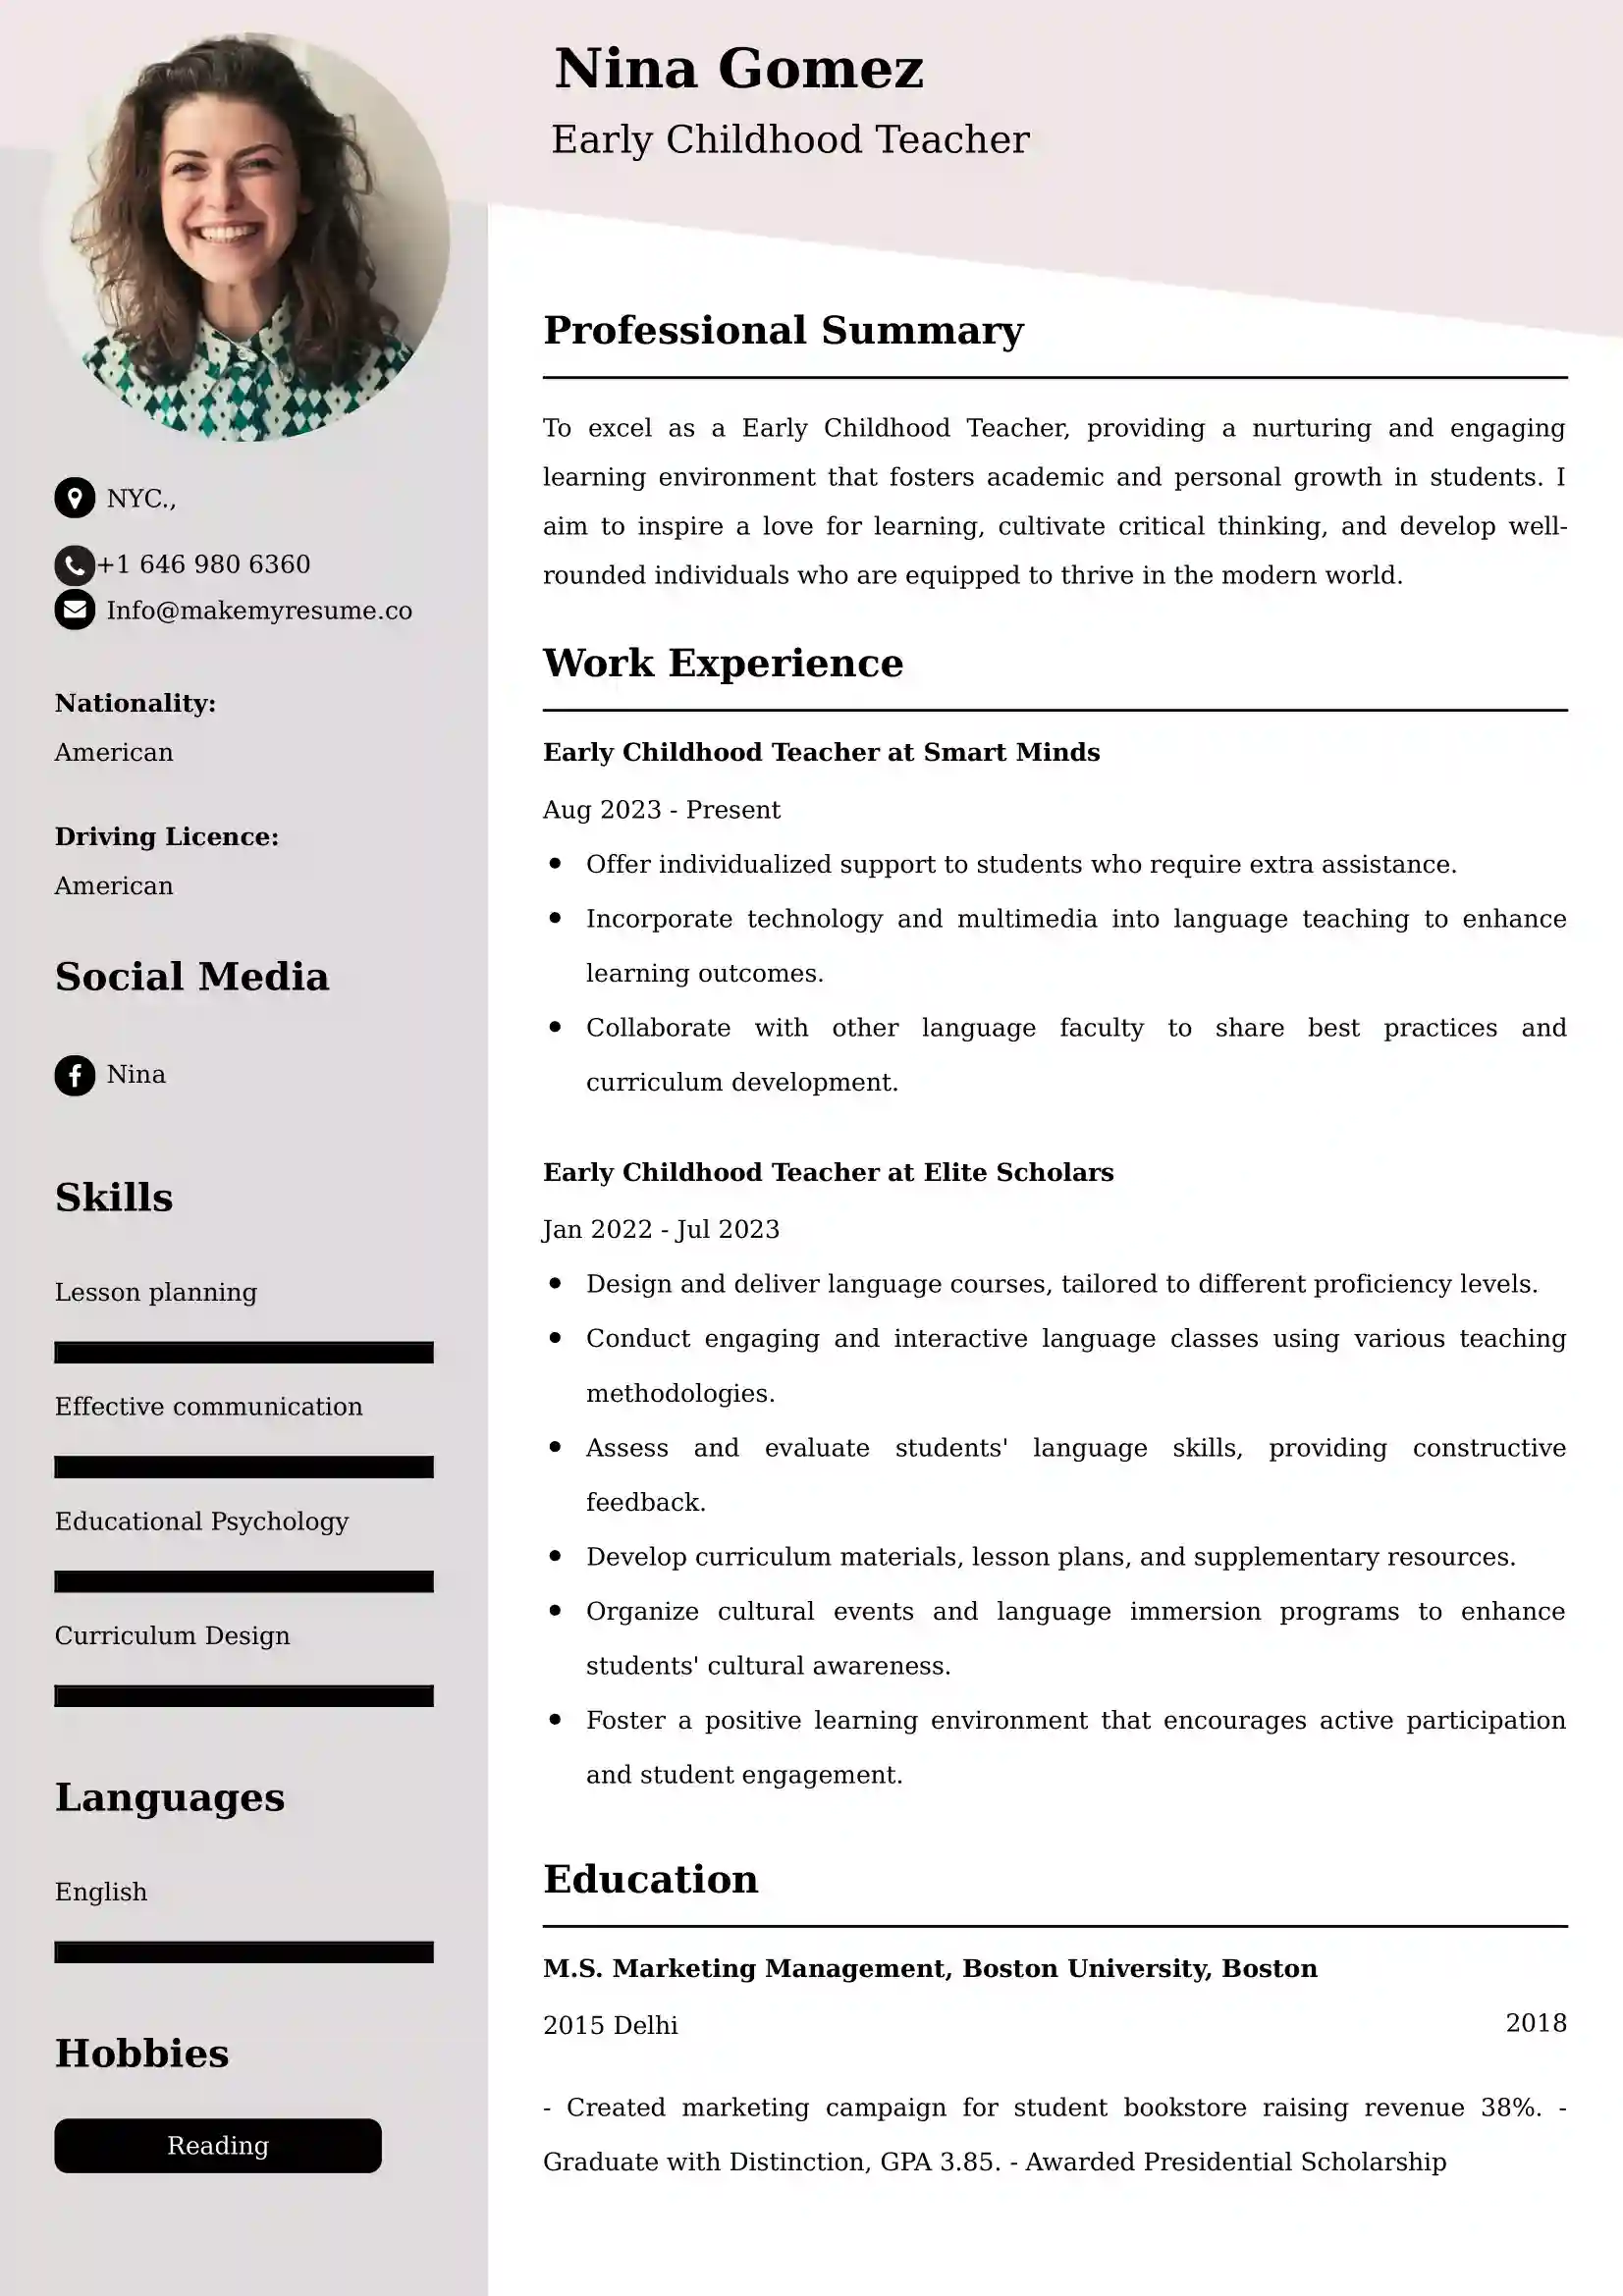 Early Childhood Teacher Resume Examples - UK Format, Latest Template.